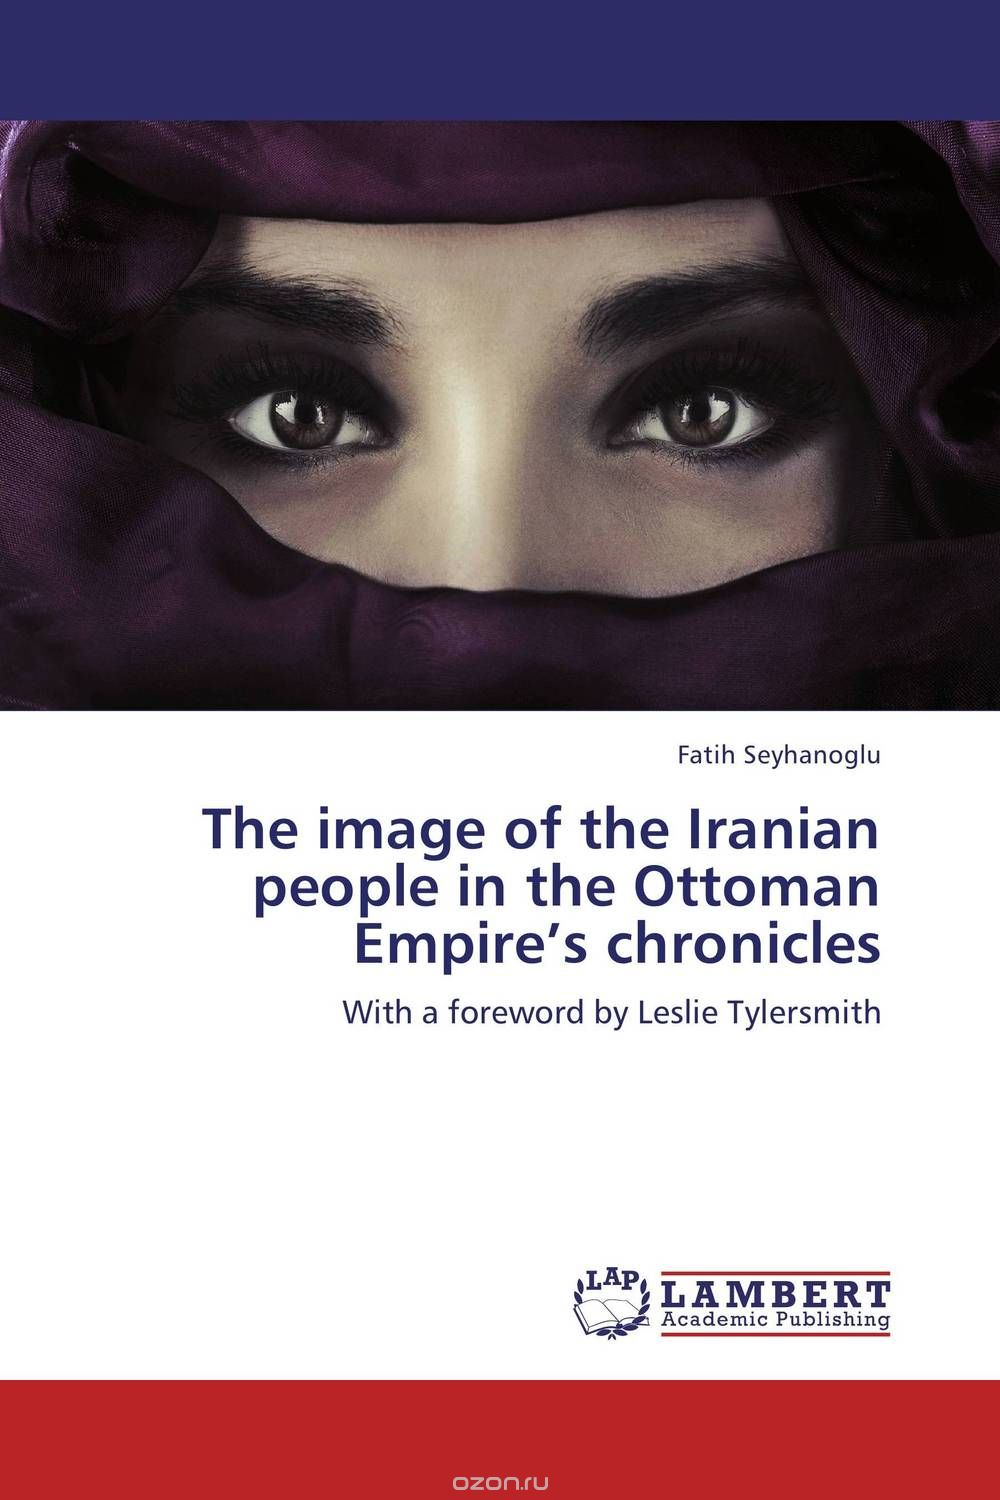 Скачать книгу "The image of the Iranian people in the Ottoman Empire’s chronicles"